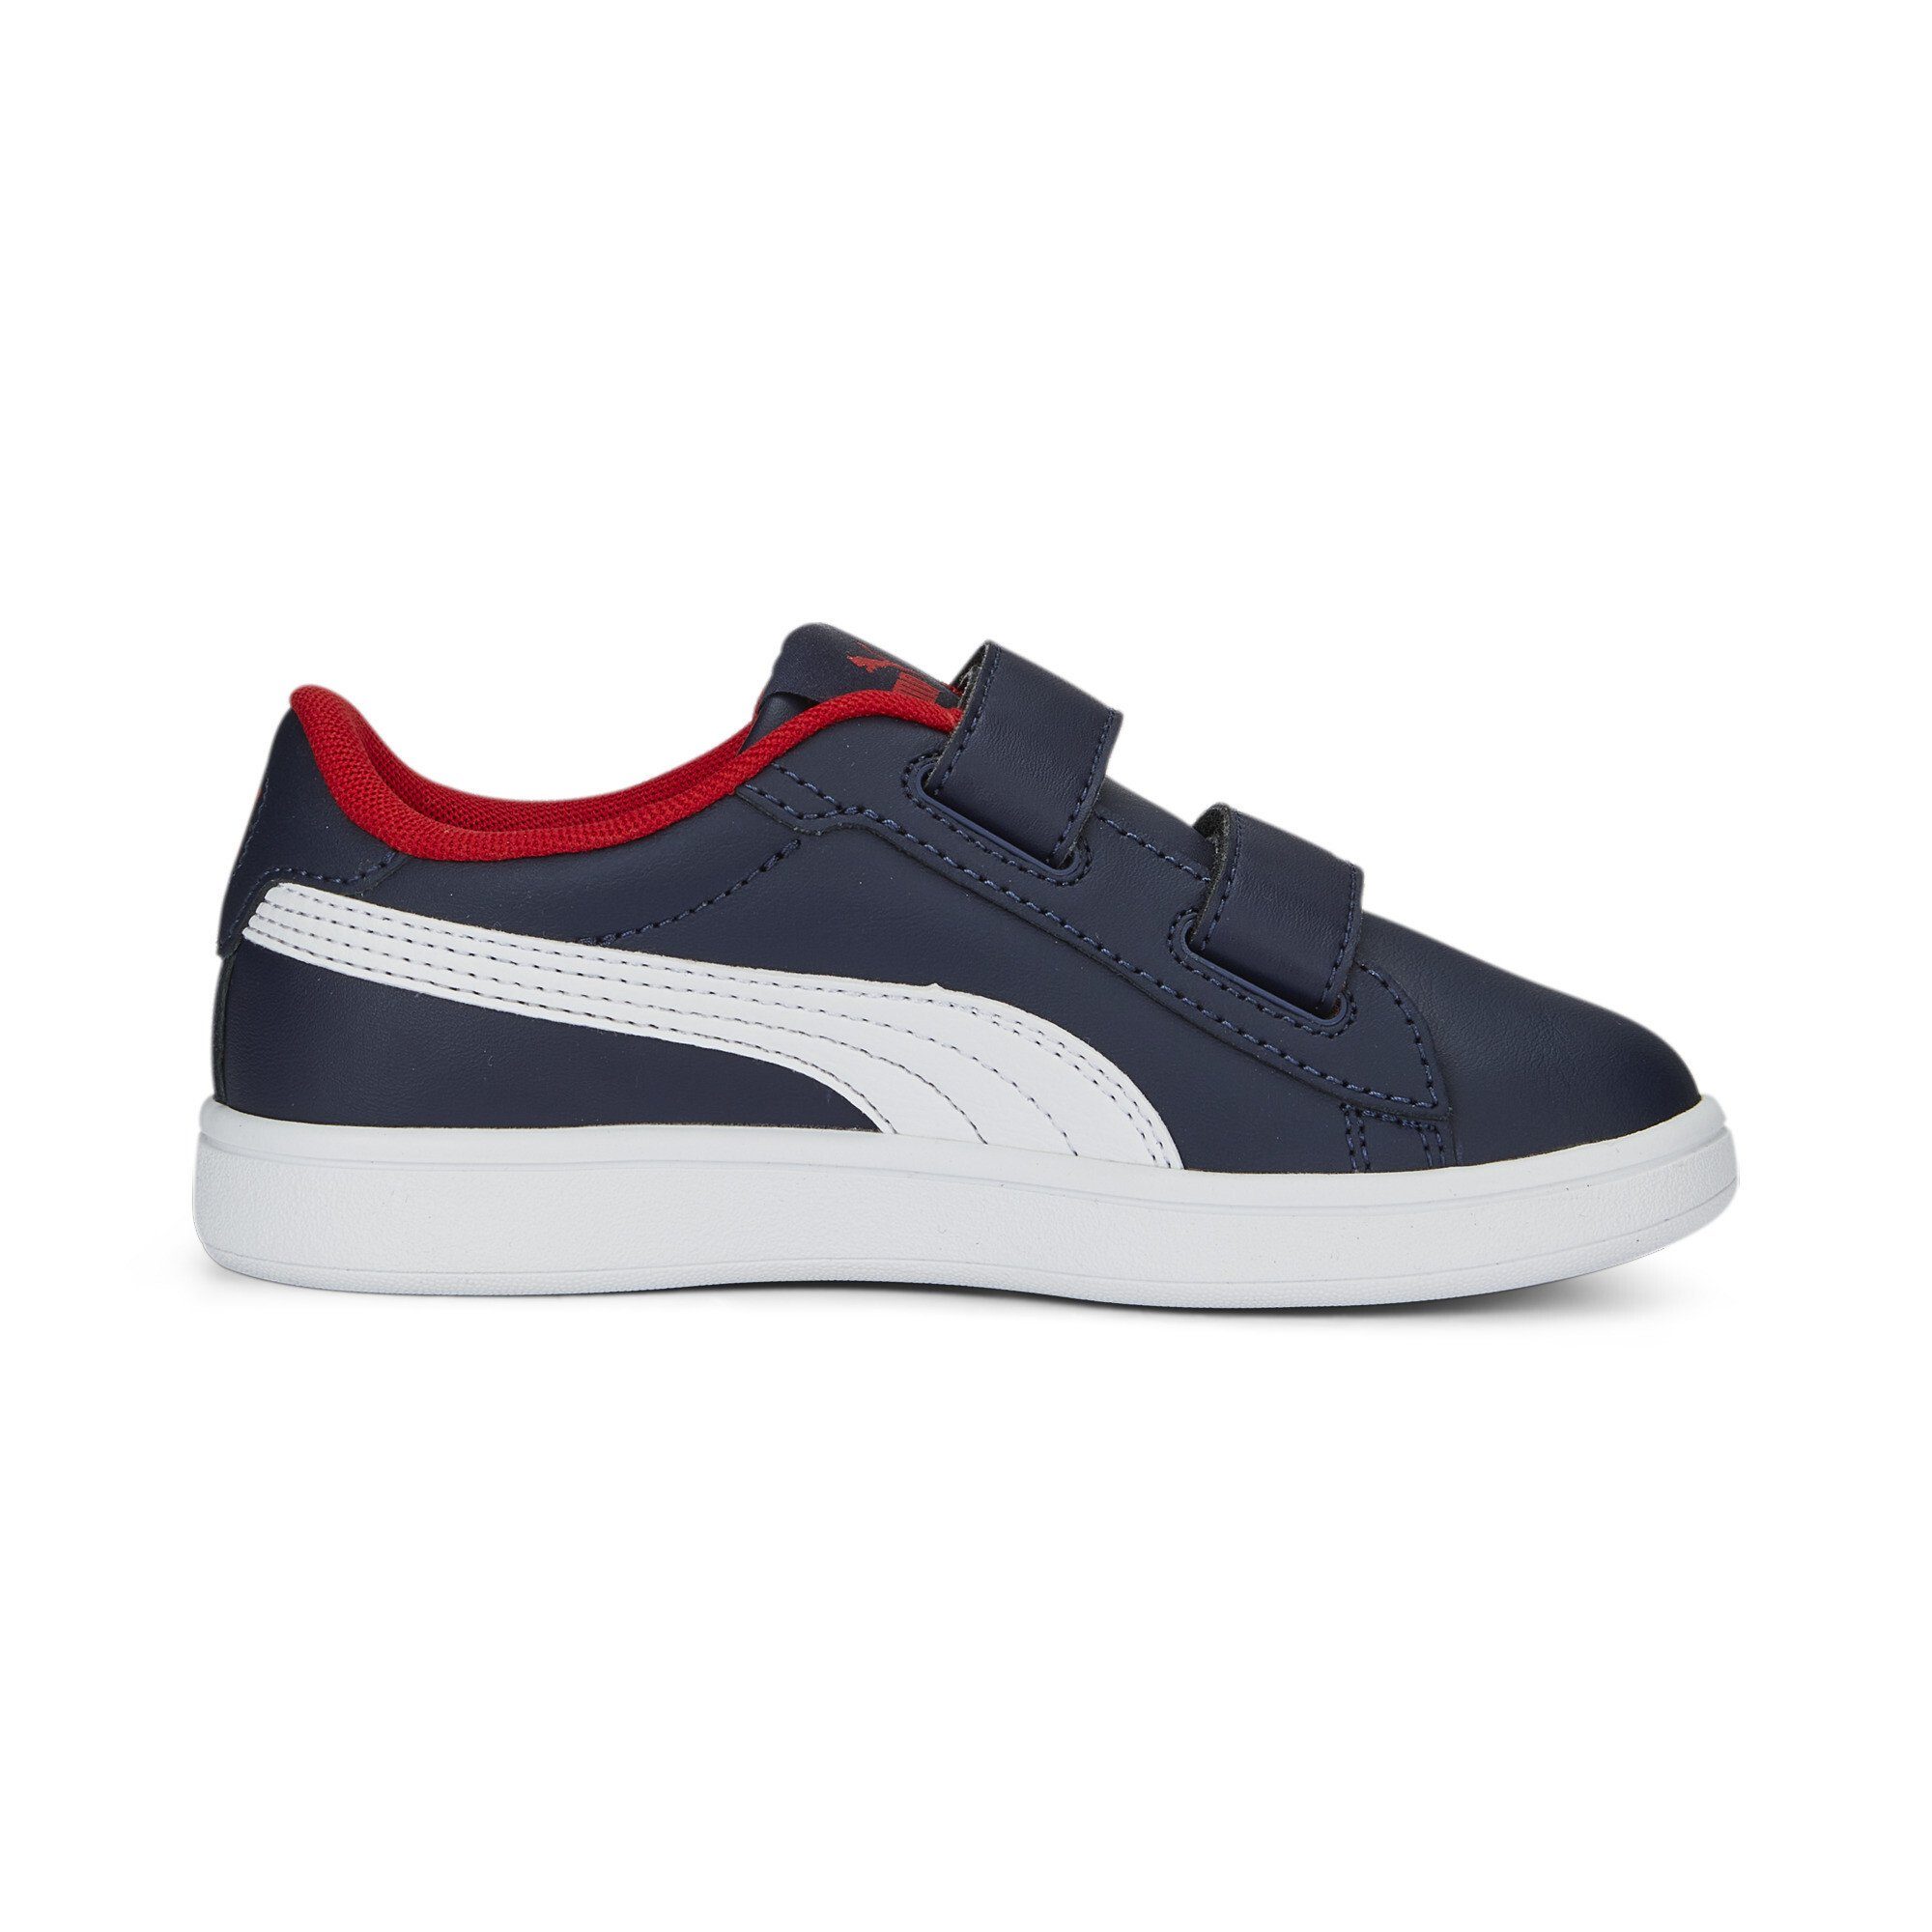 Sneakers All 3.0 Red Leather Smash Navy Sneaker Time For White Blue PUMA